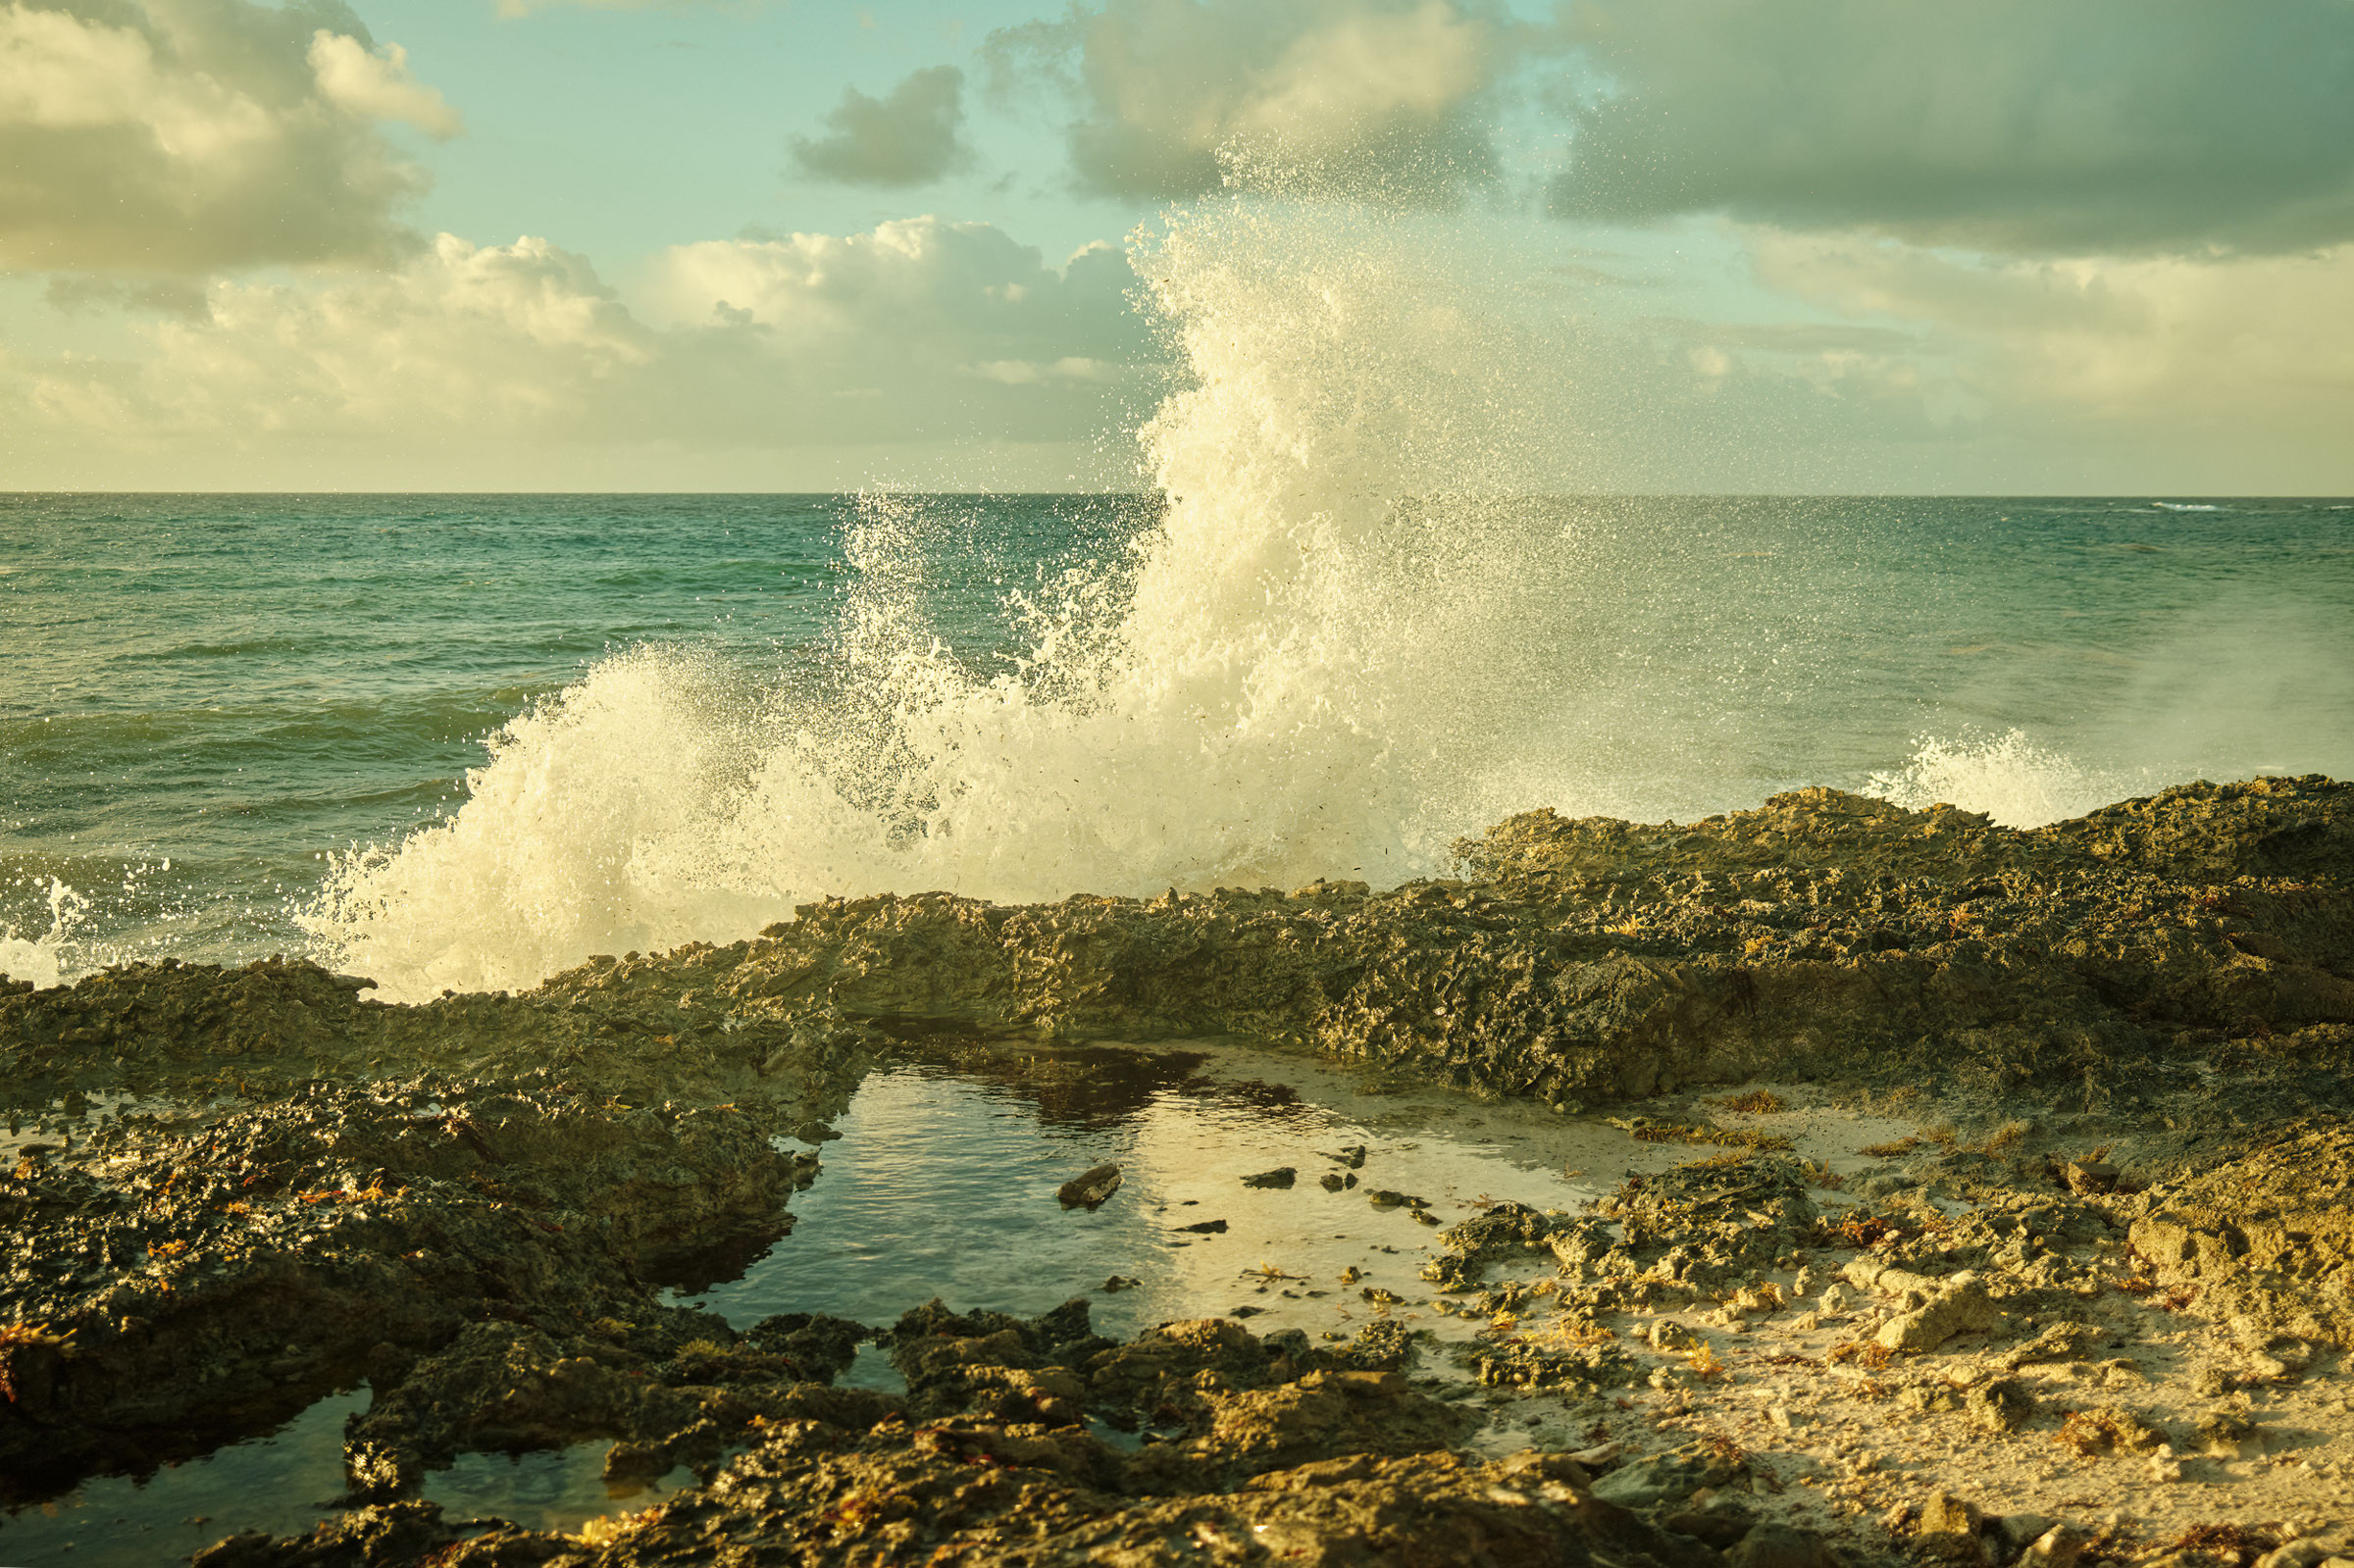 BARBADOS_WAVES-HIT-THE-ROCKS-IN-THE-MORNING-SUN-IN-BARBADOS